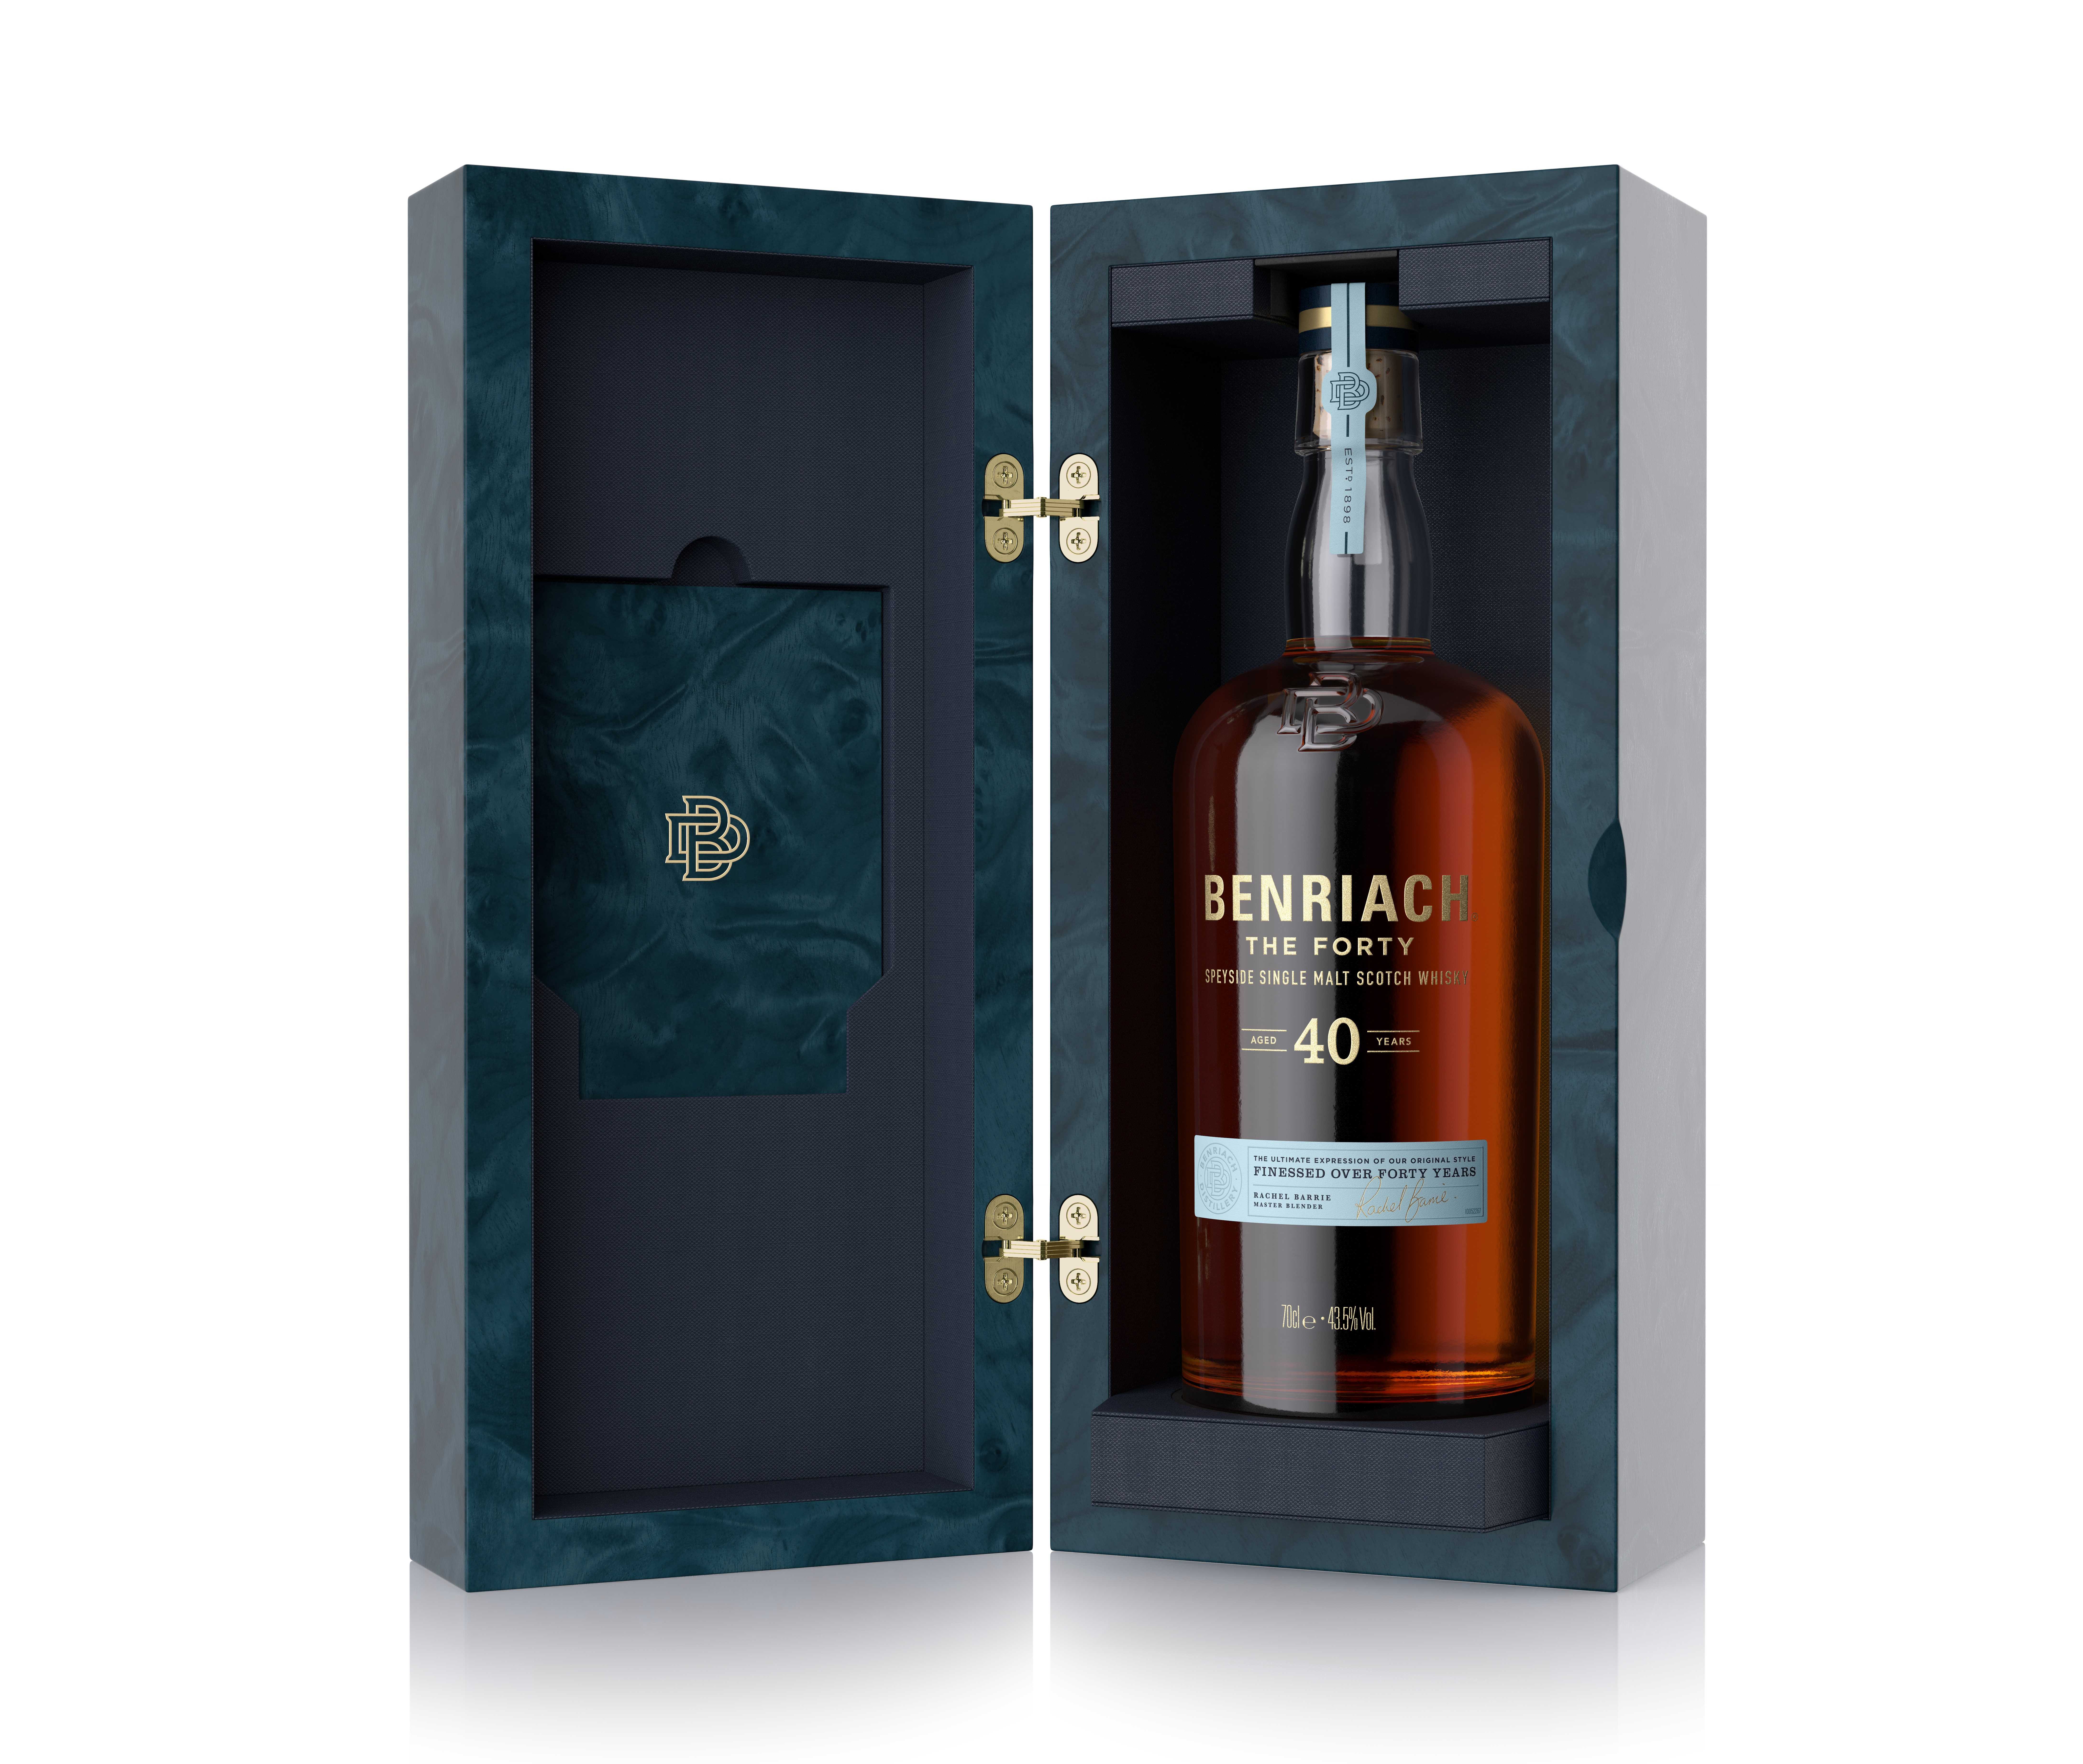 Benriach The Forty single malt scotch whisky 40 years old